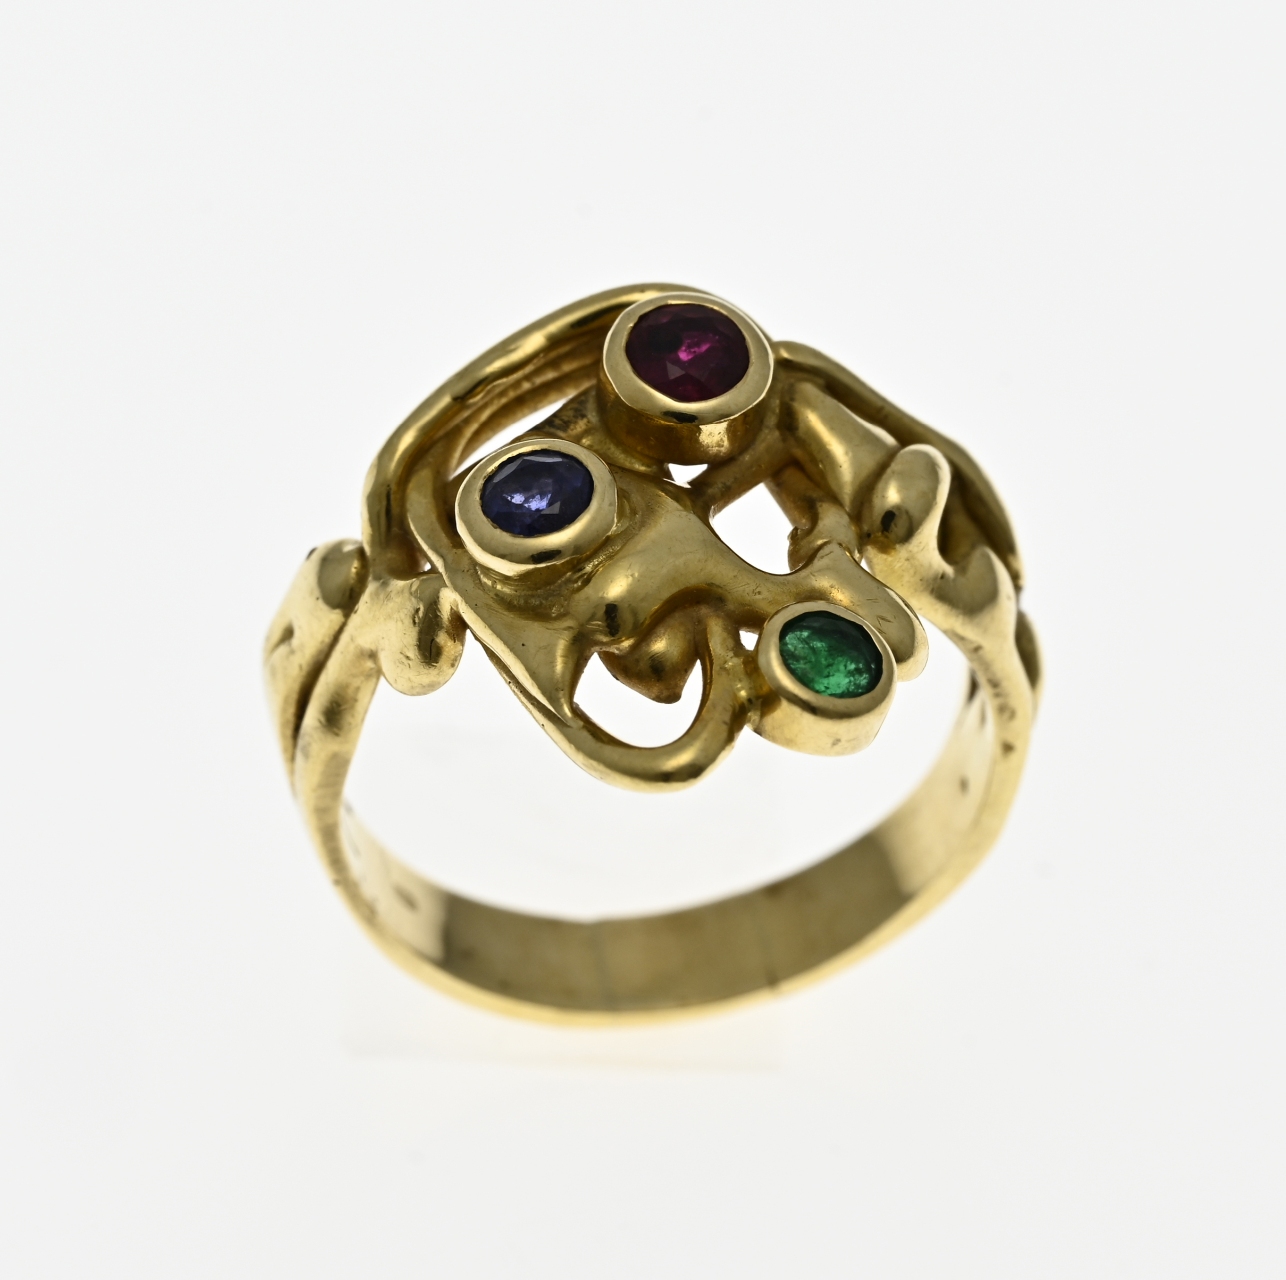 Gold ring with gemstone